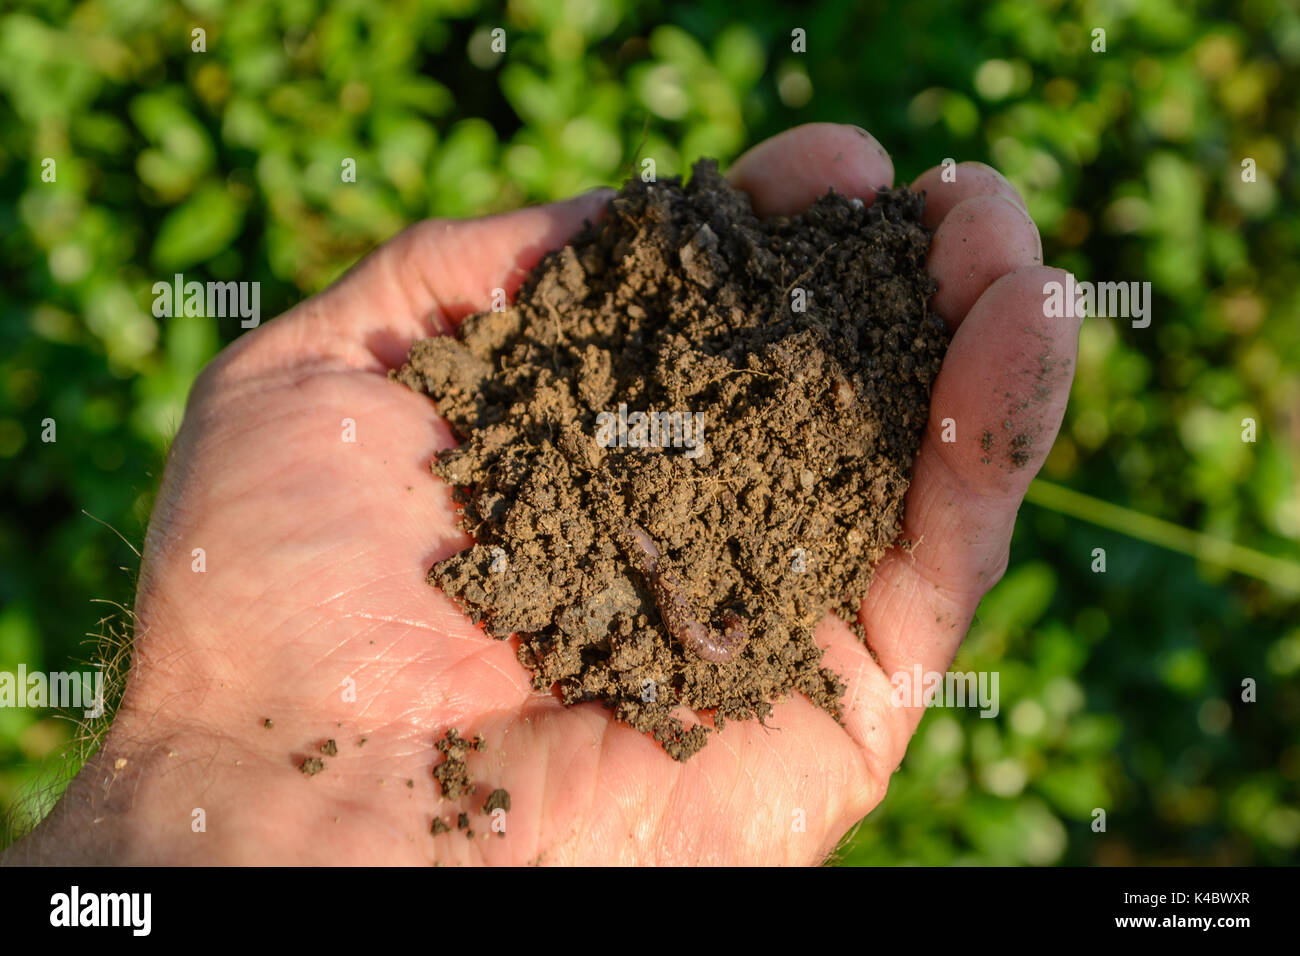 Hand With Healthy Earth And A Earthworm Stock Photo